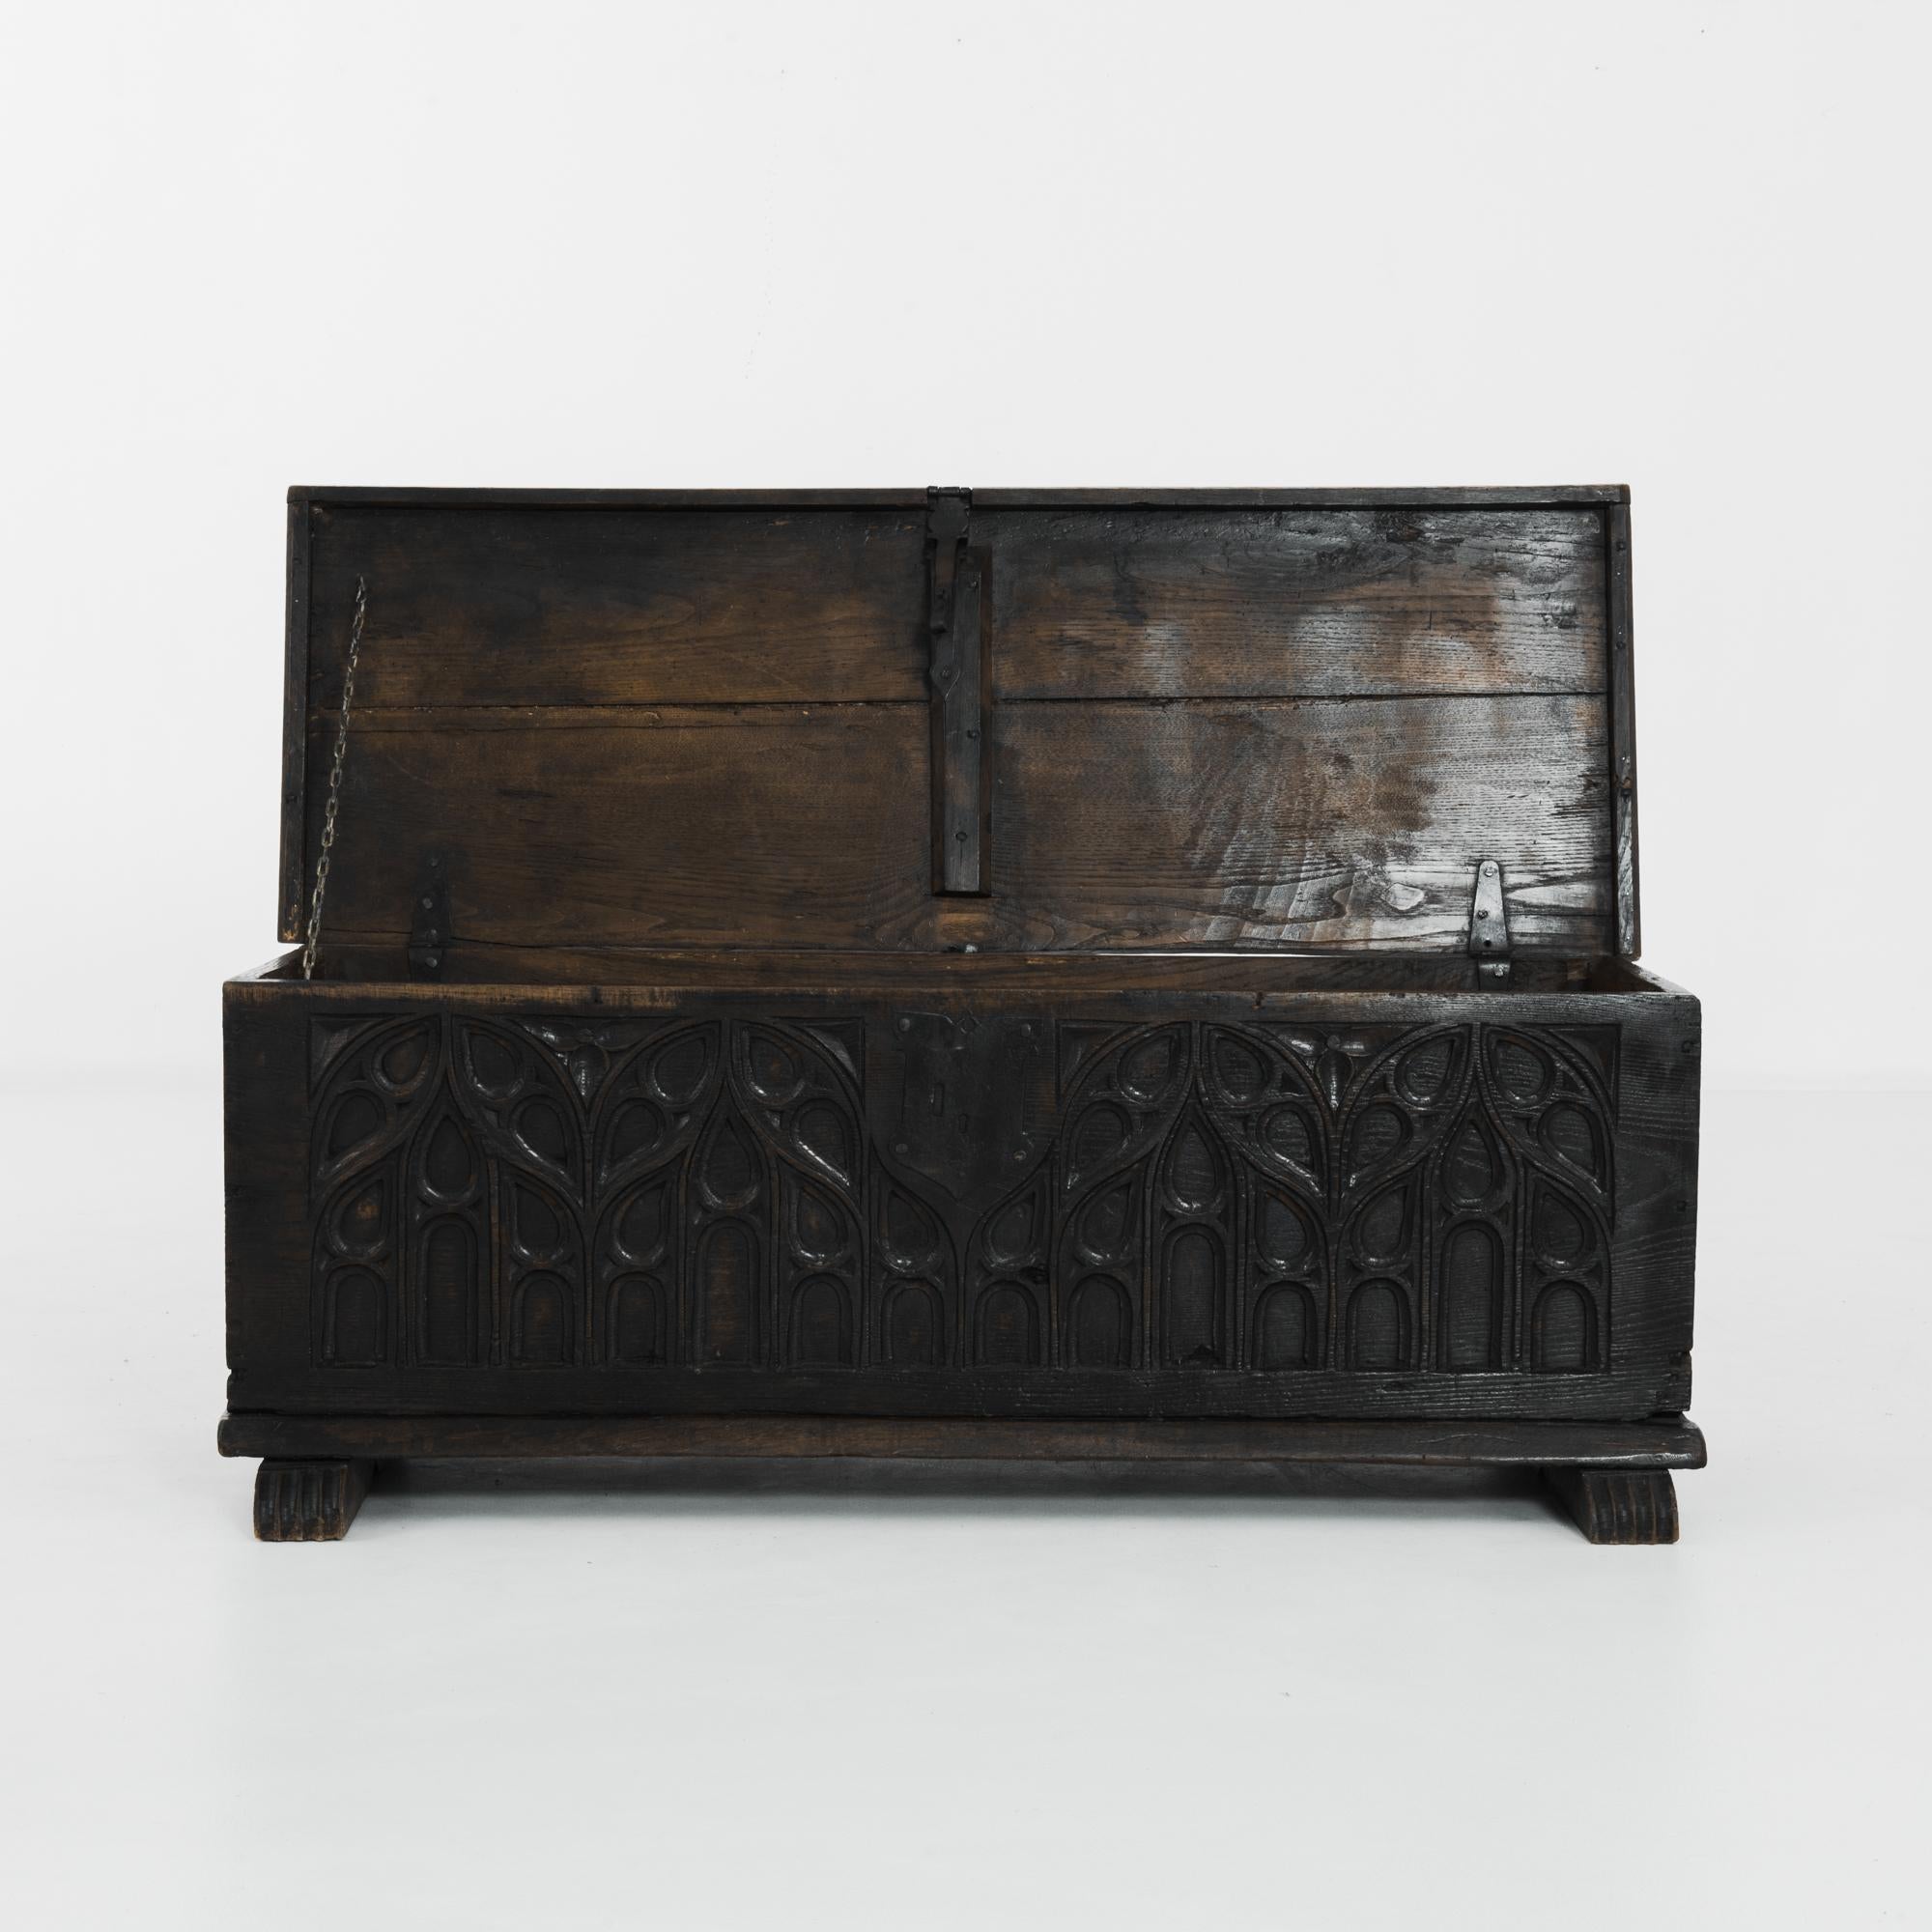 An oak trunk from 1850s France. Intertwining carved arches echo the forms of gothic tracery, lending the dark wood a Neo-Gothic aesthetic. The lid is closed with a hefty metal latch and crest shaped lock plate, a personal detail which lends this